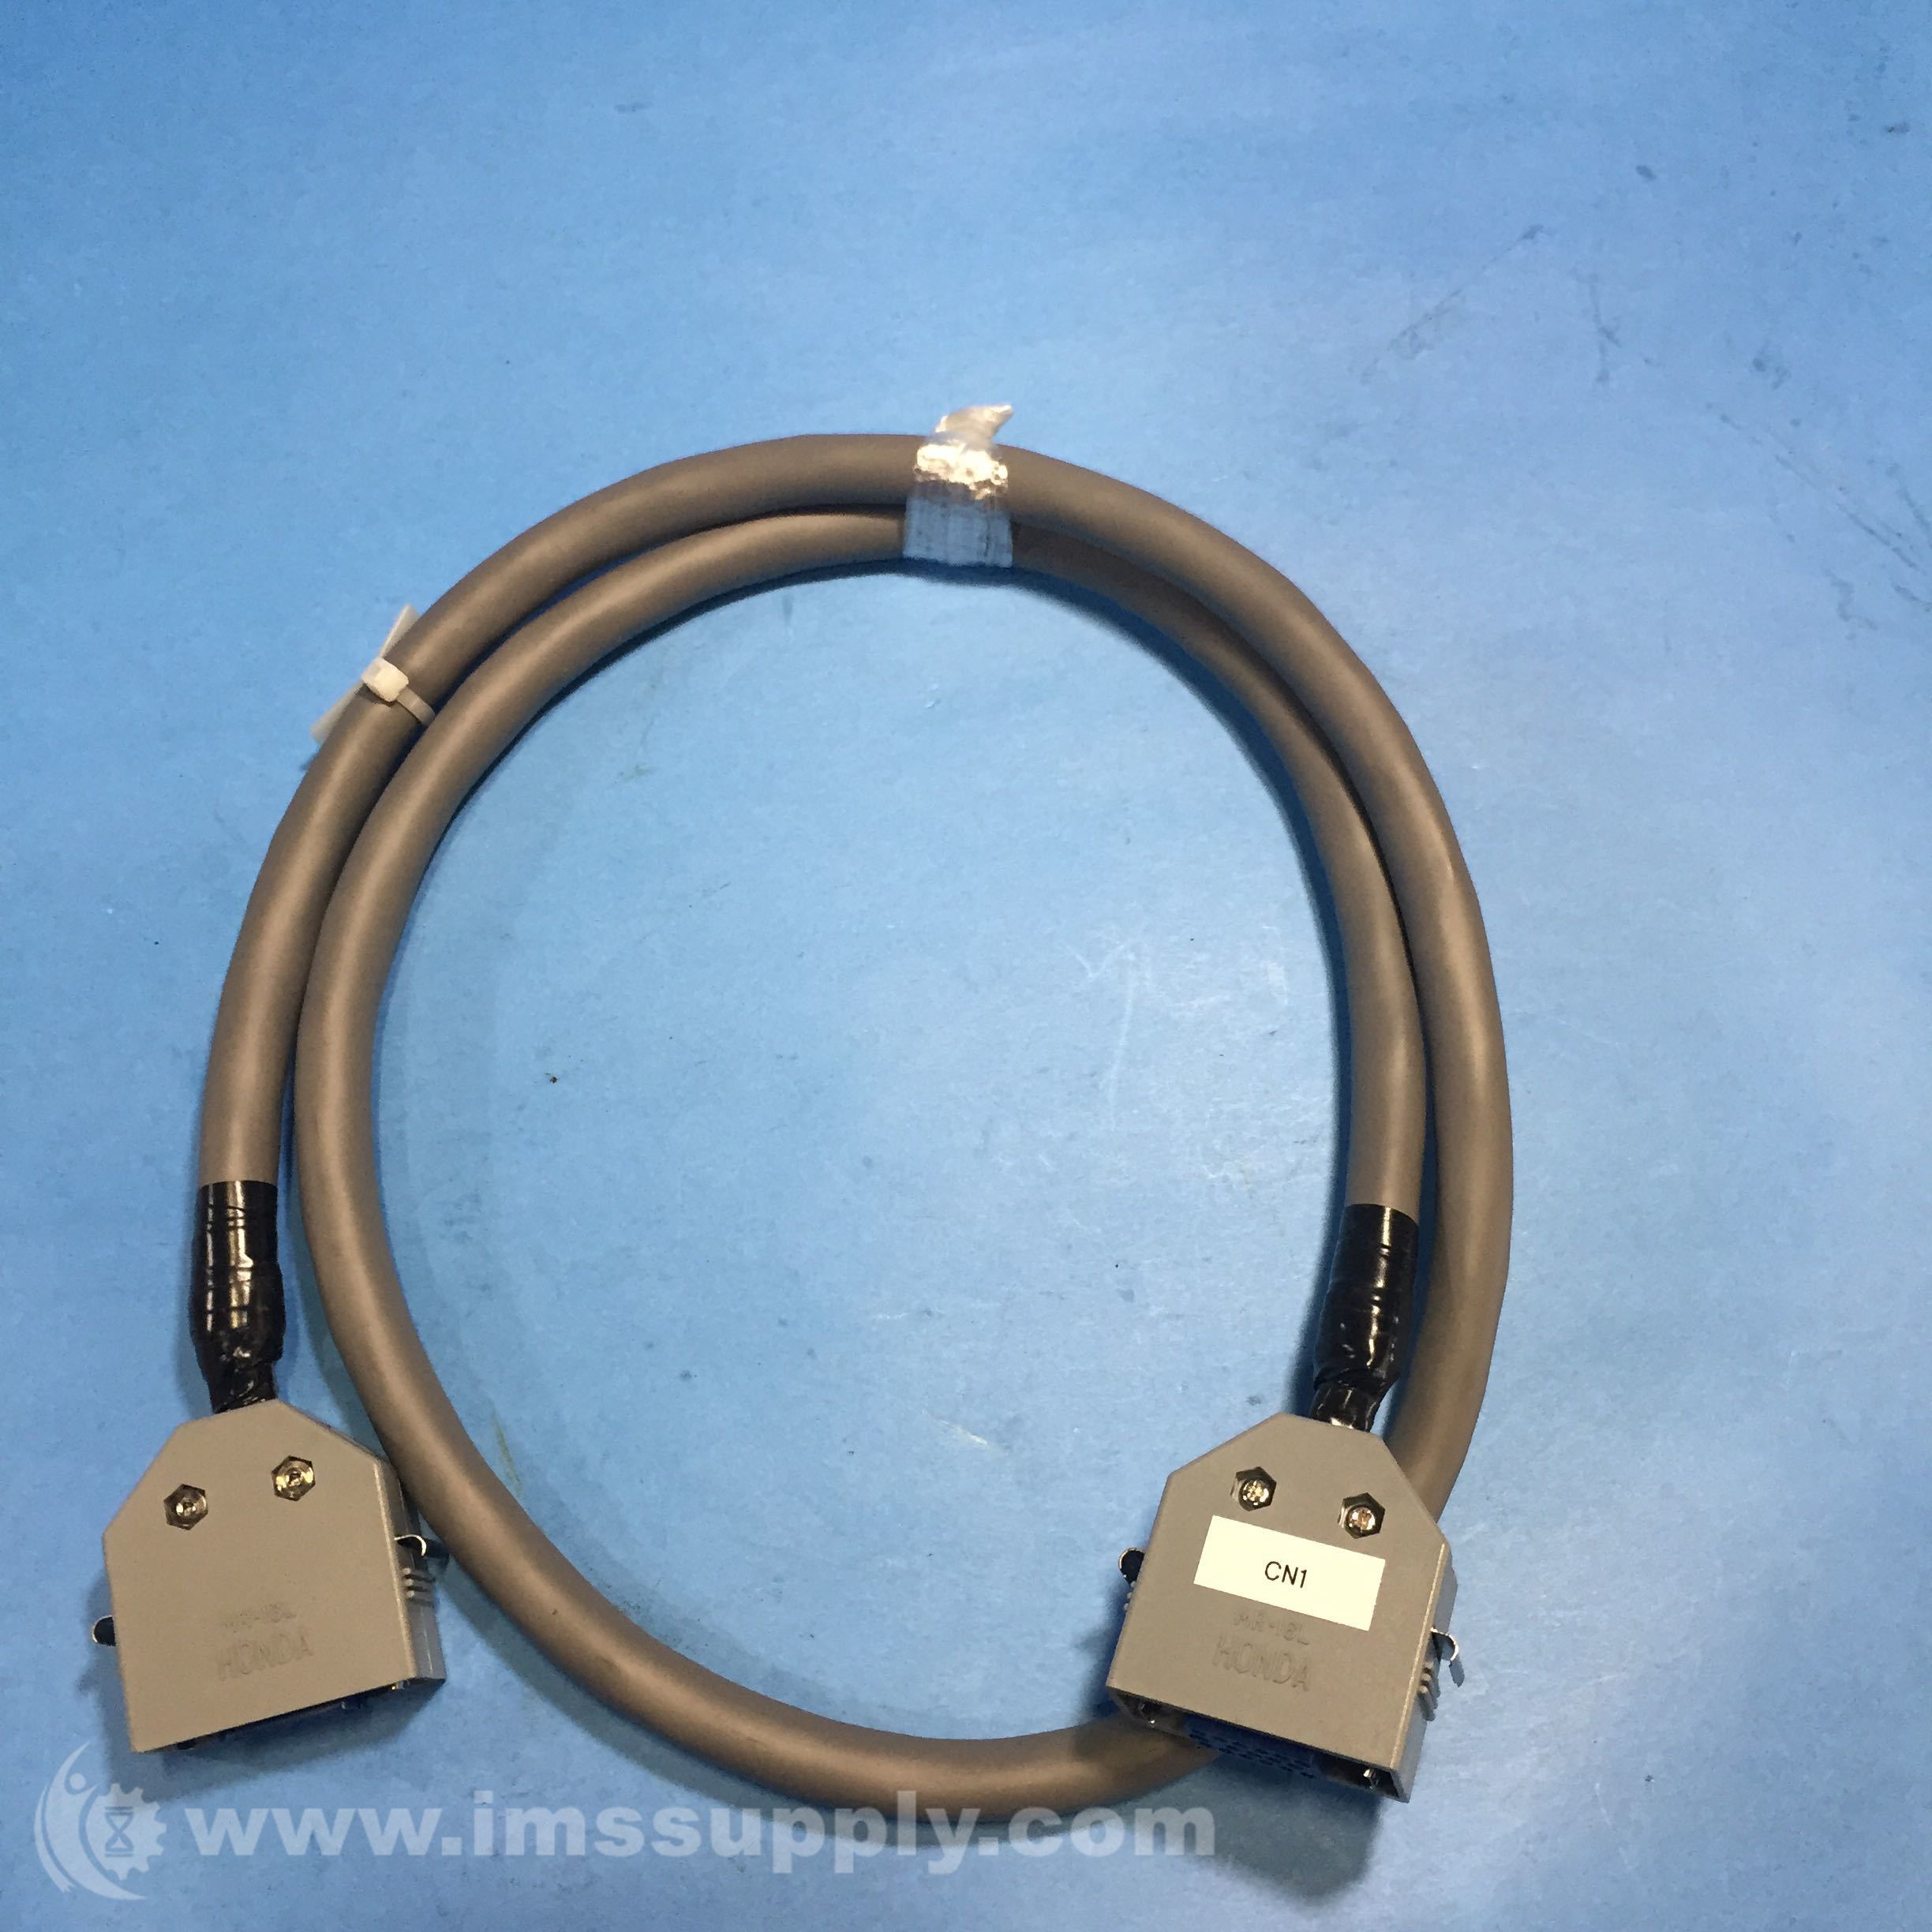 Hitachi AWM E41447 STYLE 2464 VW-1 Connector Cable - IMS Supply